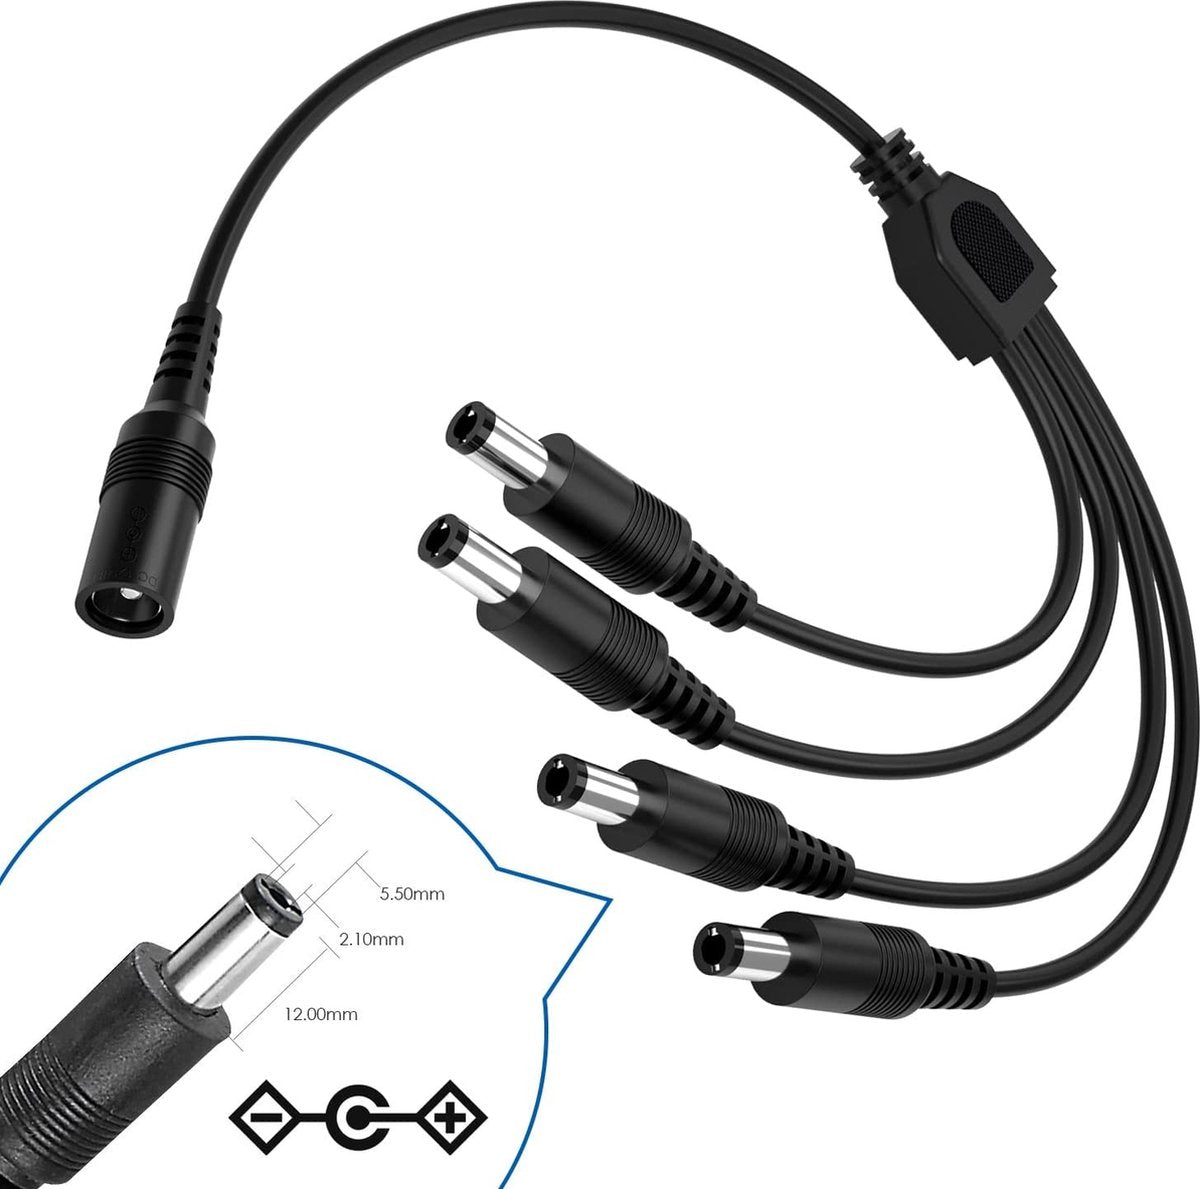 4-Way Splitter Cable - Extension Cable - For CCTV Camera, TV Box, Router & More - Adapter - 1x DC (V) To 4x DC (M)